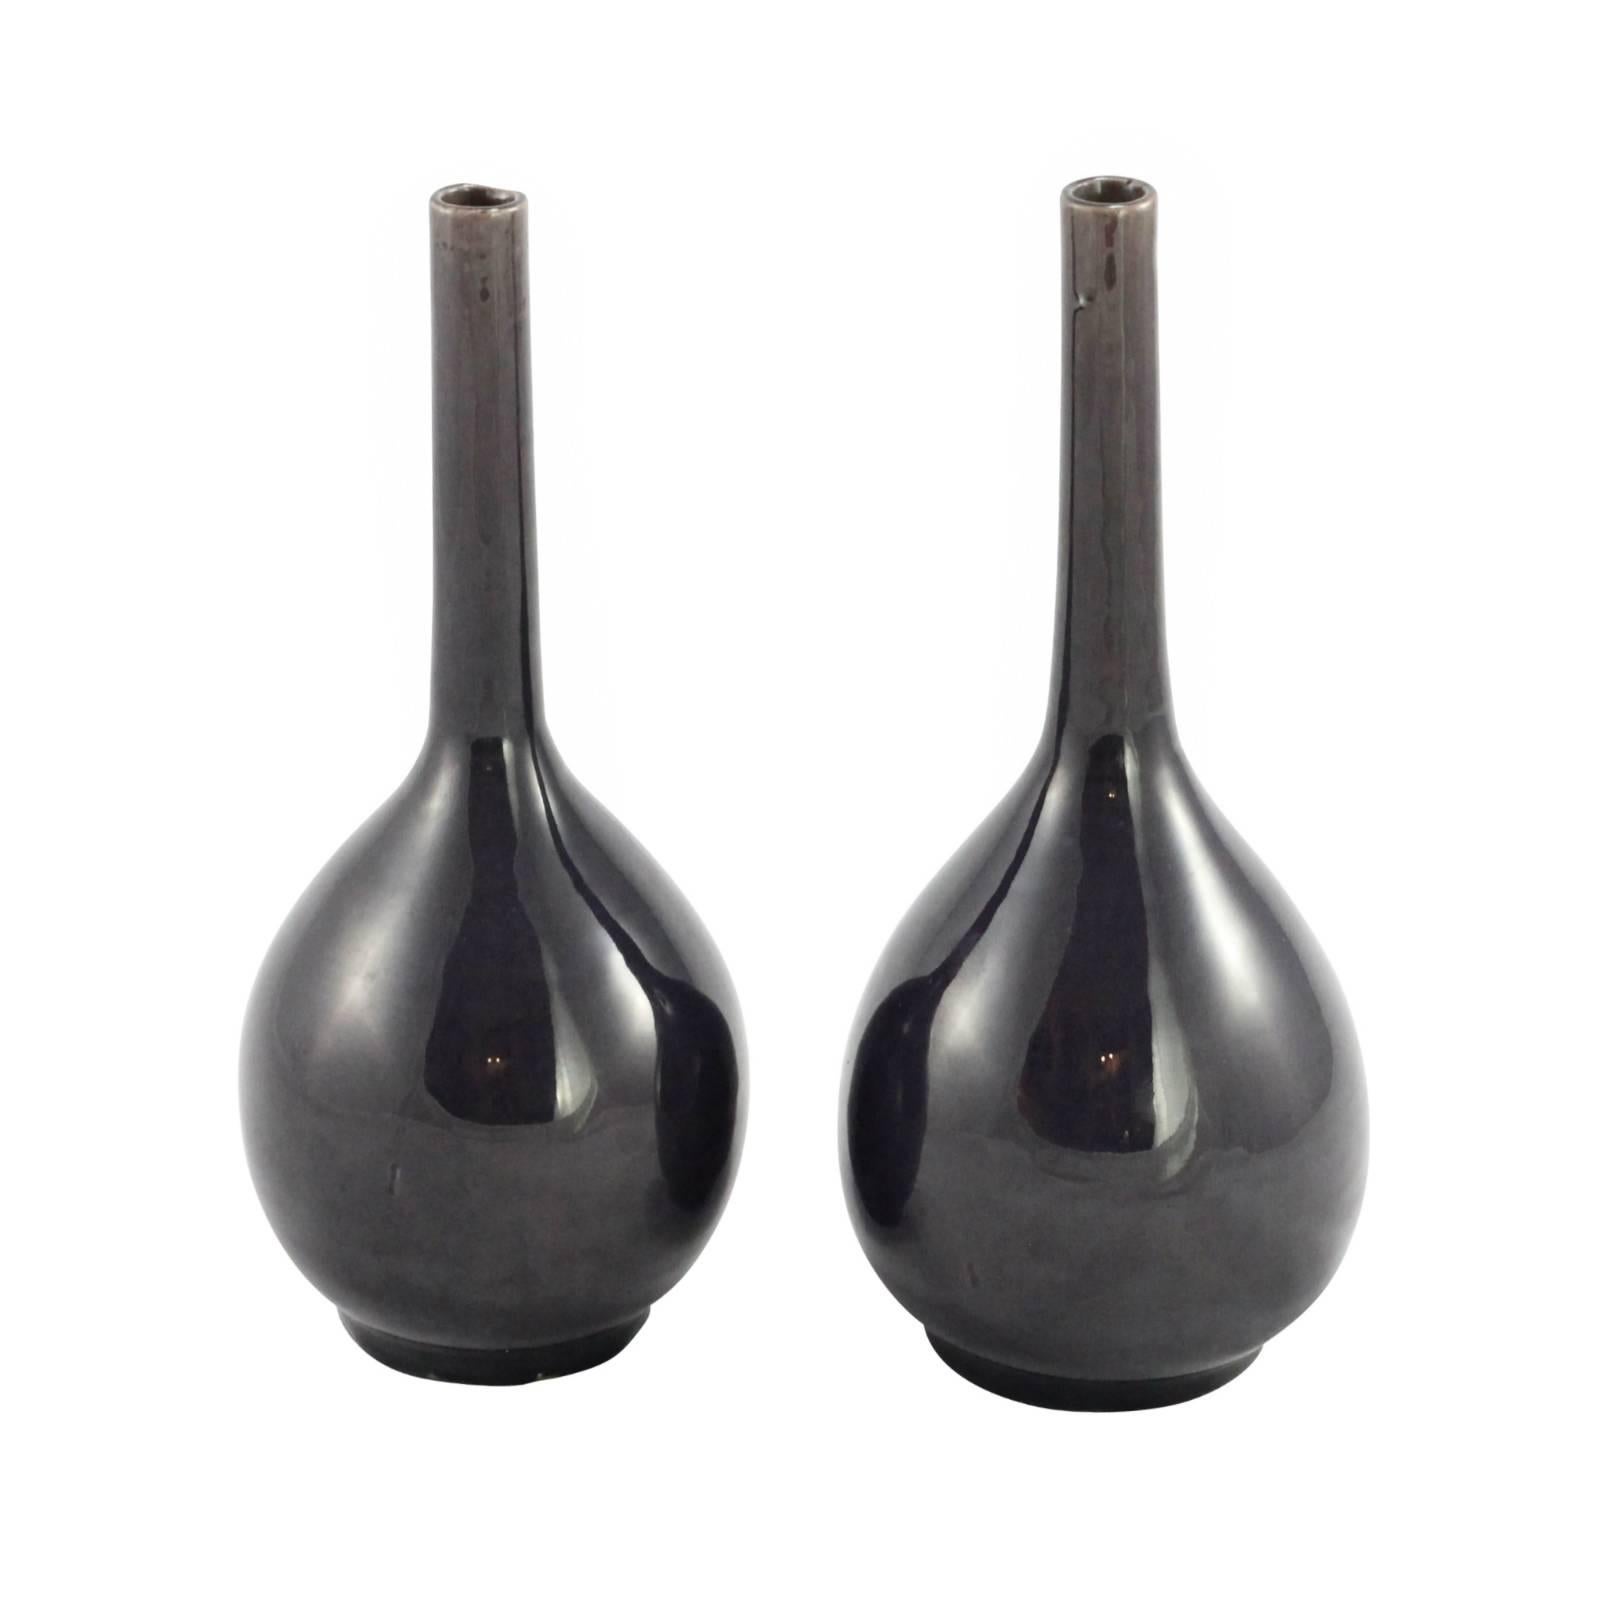 A pair of 18th century Chinese Qing dynasty aubergine monochrome glazed bottle vases, produced during the Qianlong period.

Provenance: Sotheby's Australia November 2002 Auction Lot 555, from the estate of Ross Gordon.